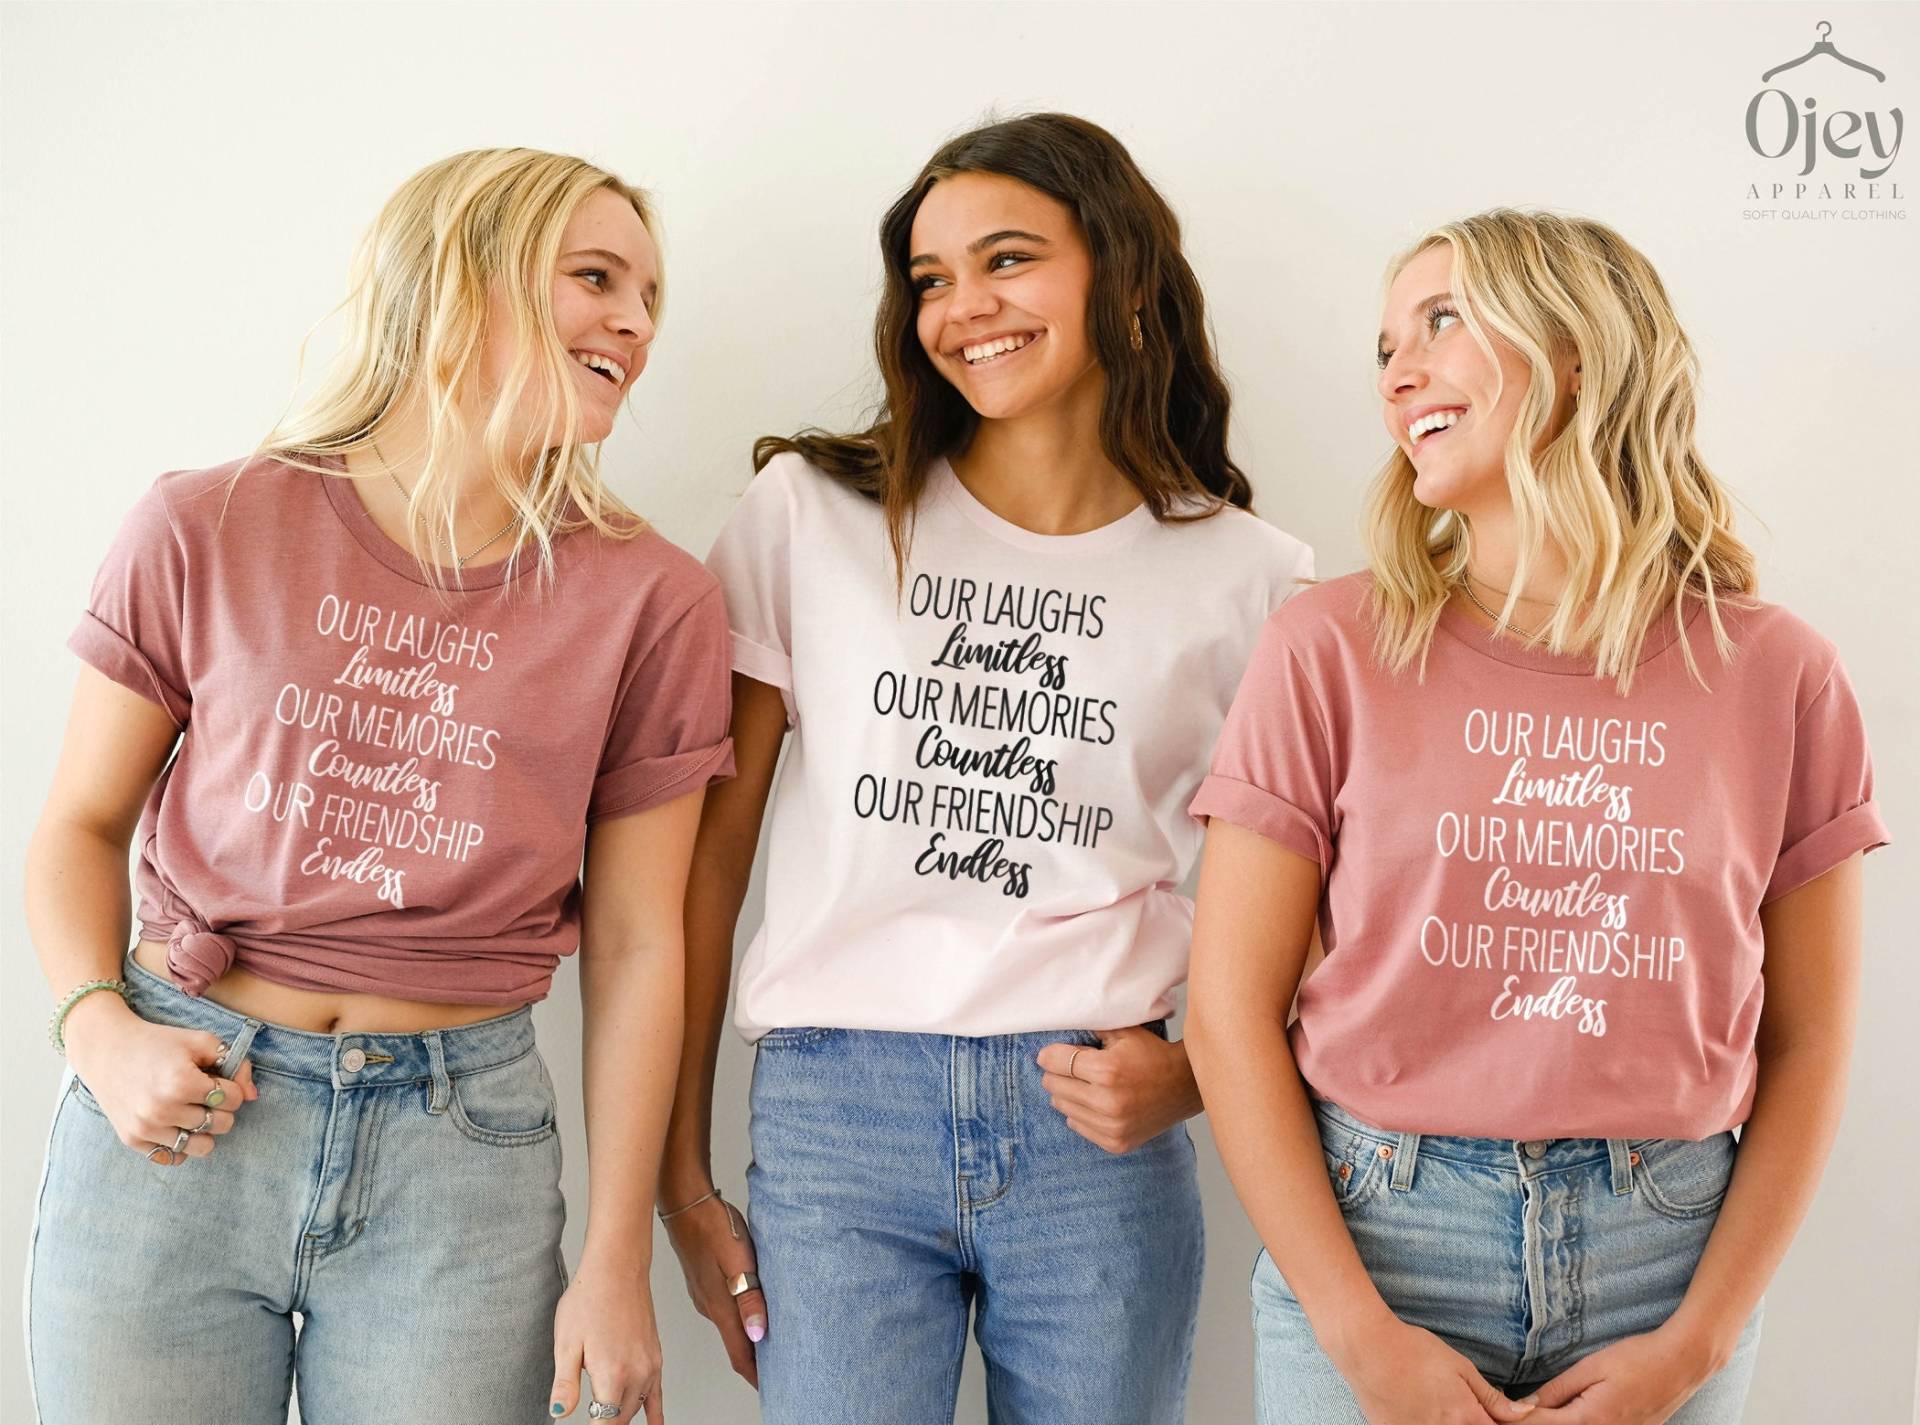 Best Friends Shirt, Our Laughs Are Limitless, Memories Countless, Friendship Is Endless, Friend Matching Tees, Gifts von OJEYAPPAREL